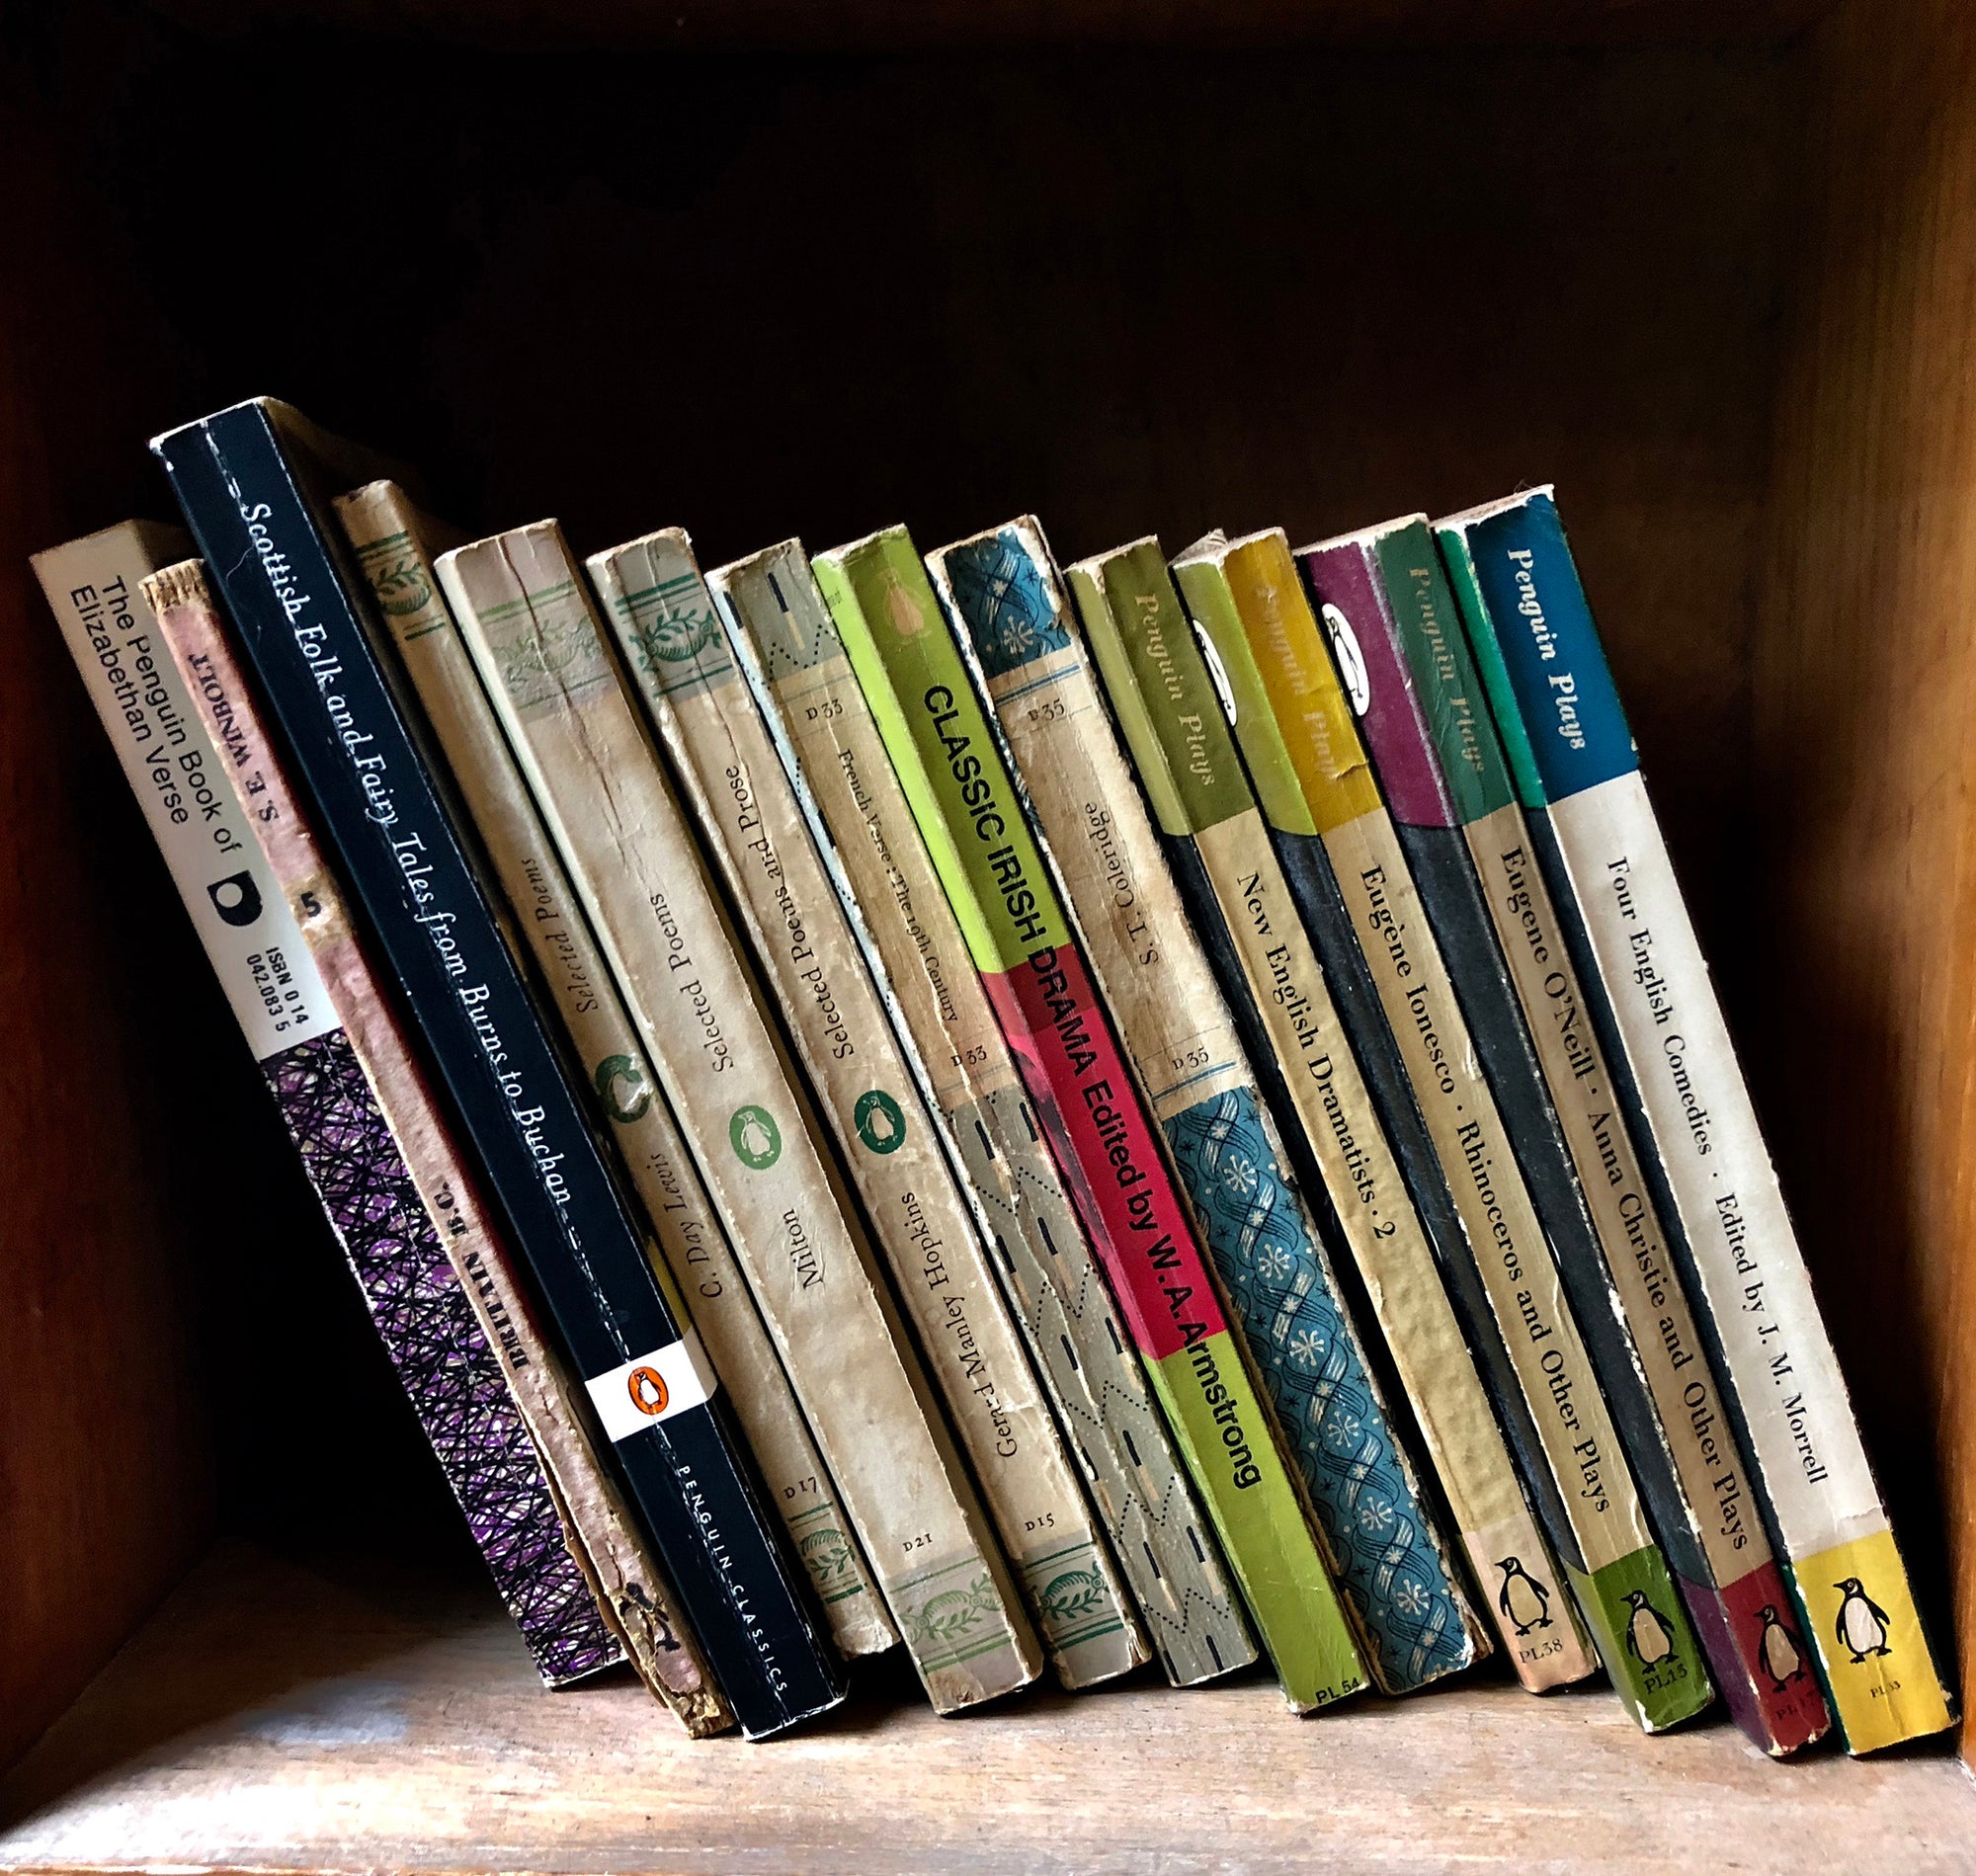 Folk and Fairy Tales, Wells-next-the-Sea shows the well worn spines of vintage books on a shelf, photographed by Richard Heeps in a secondhand bookshop in the British seaside town Wells-next-the-Sea.